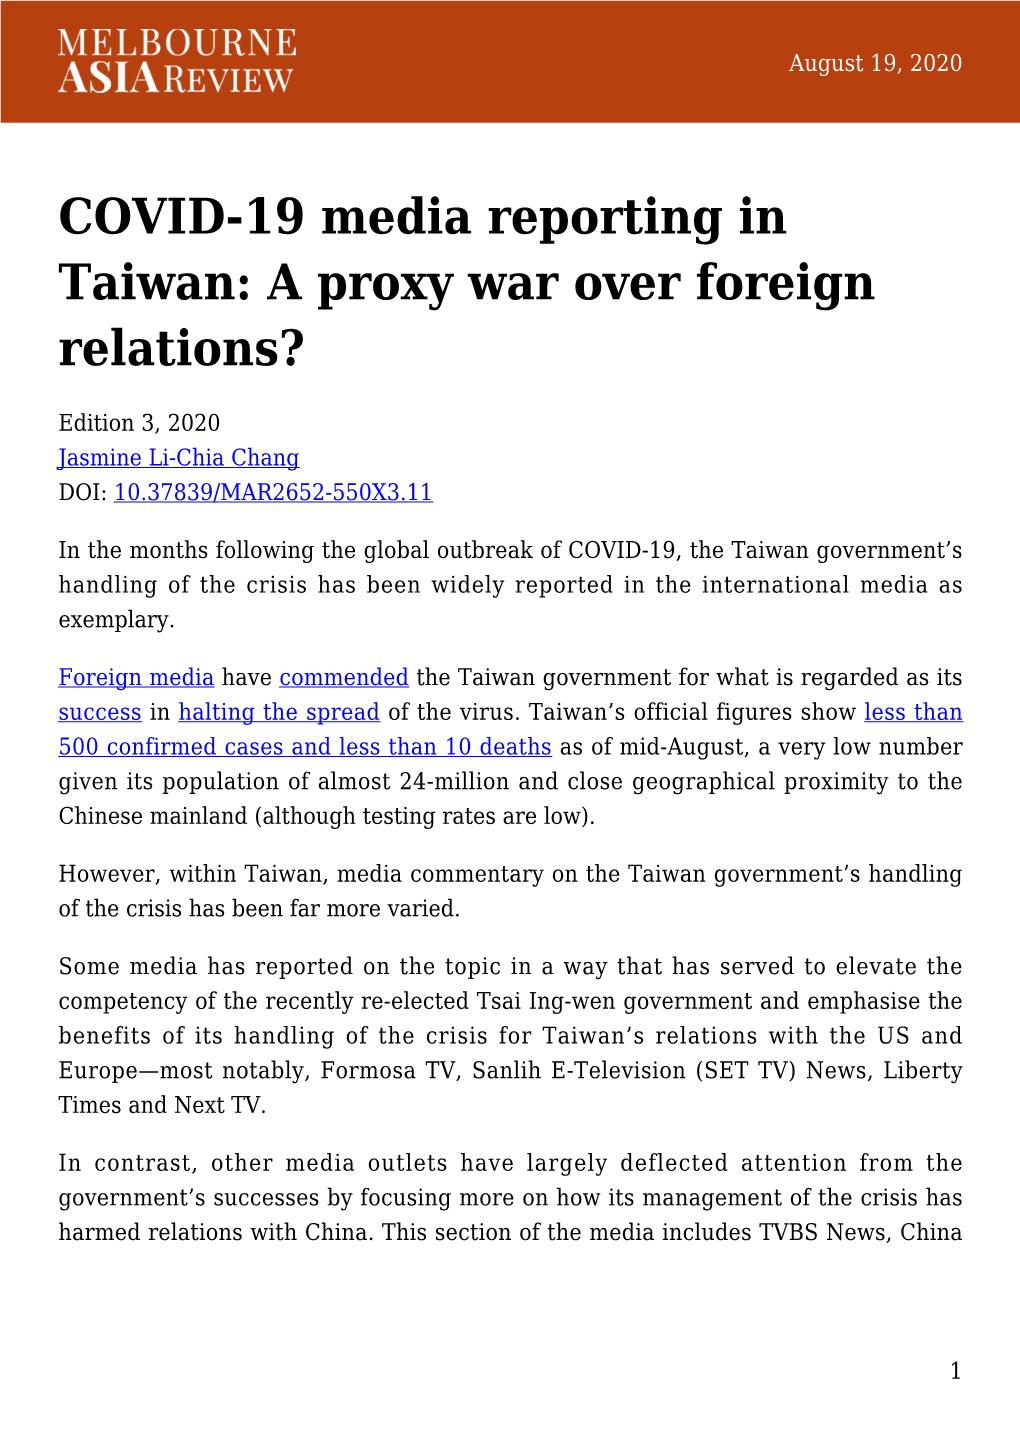 COVID-19 Media Reporting in Taiwan: a Proxy War Over Foreign Relations?